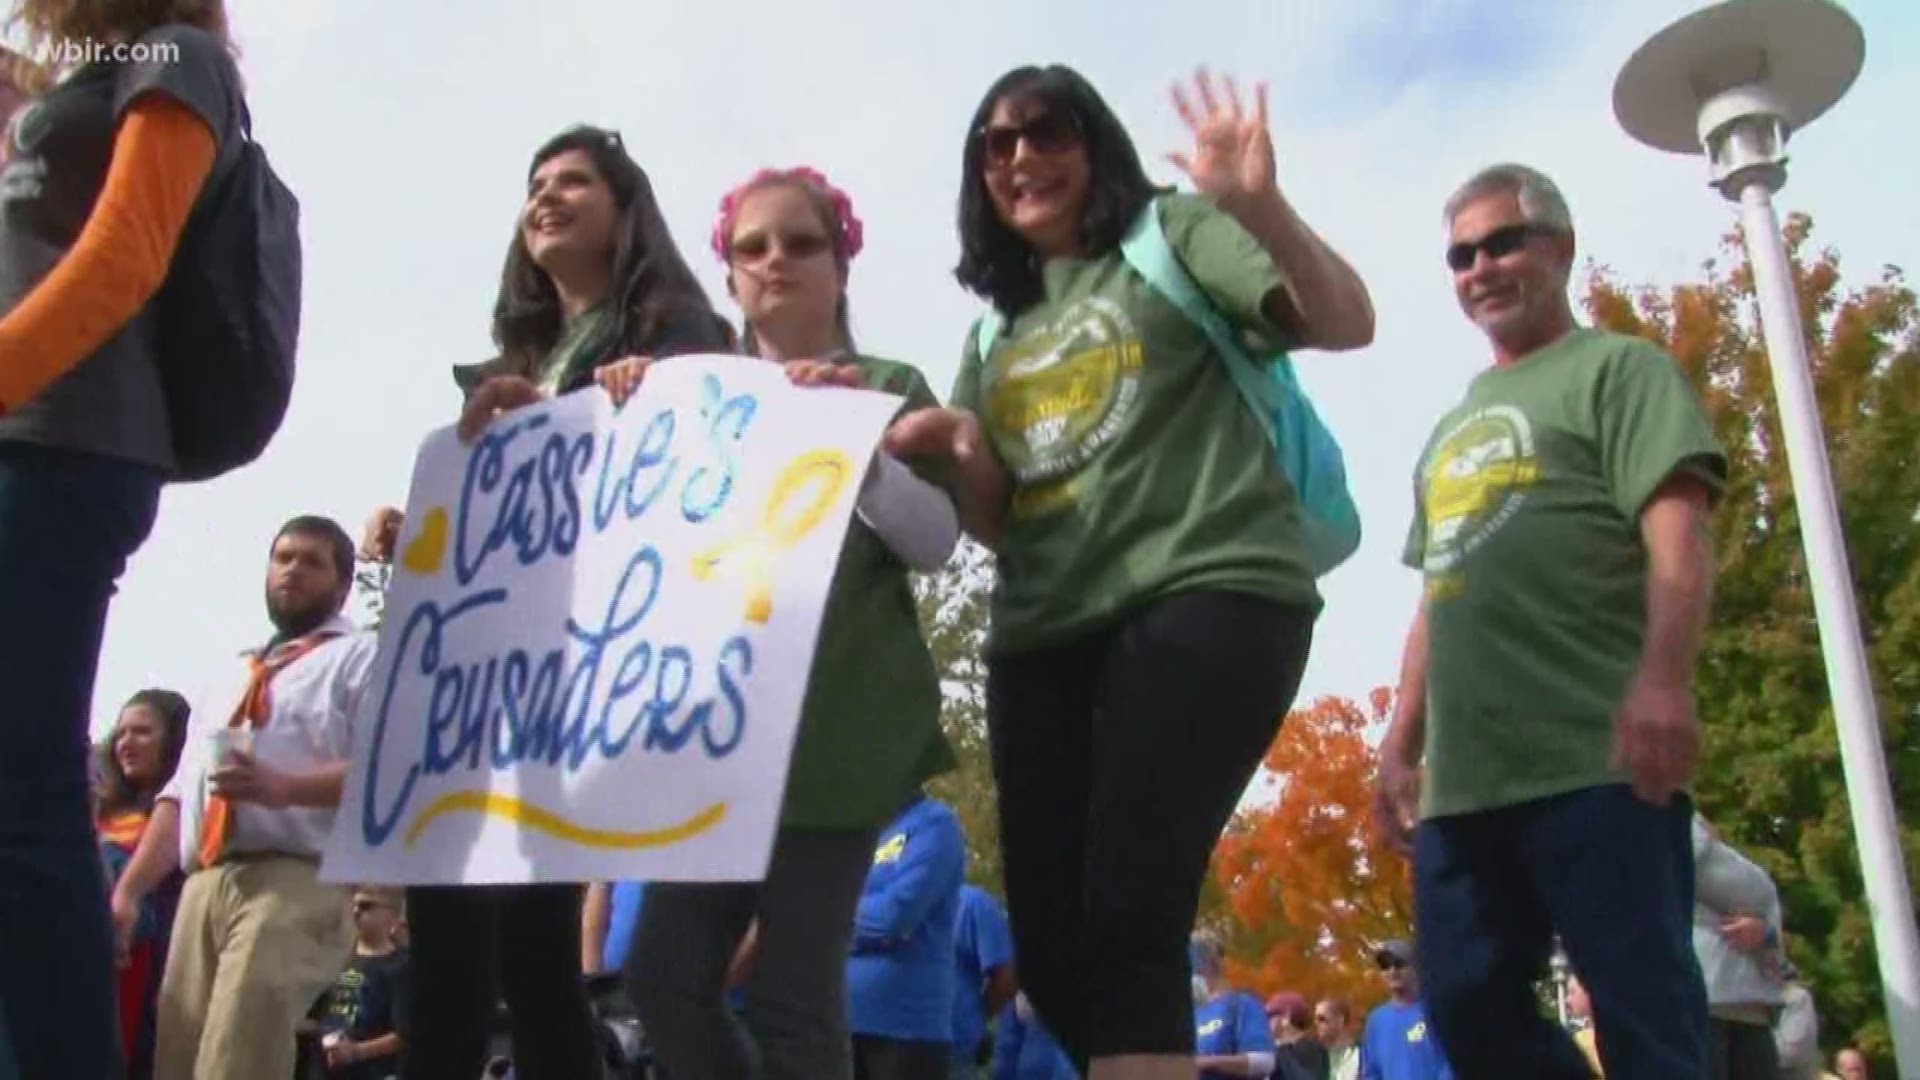 The Down Syndrome Awareness Group hosted their annual Buddy Walk today in World's Fair Park.